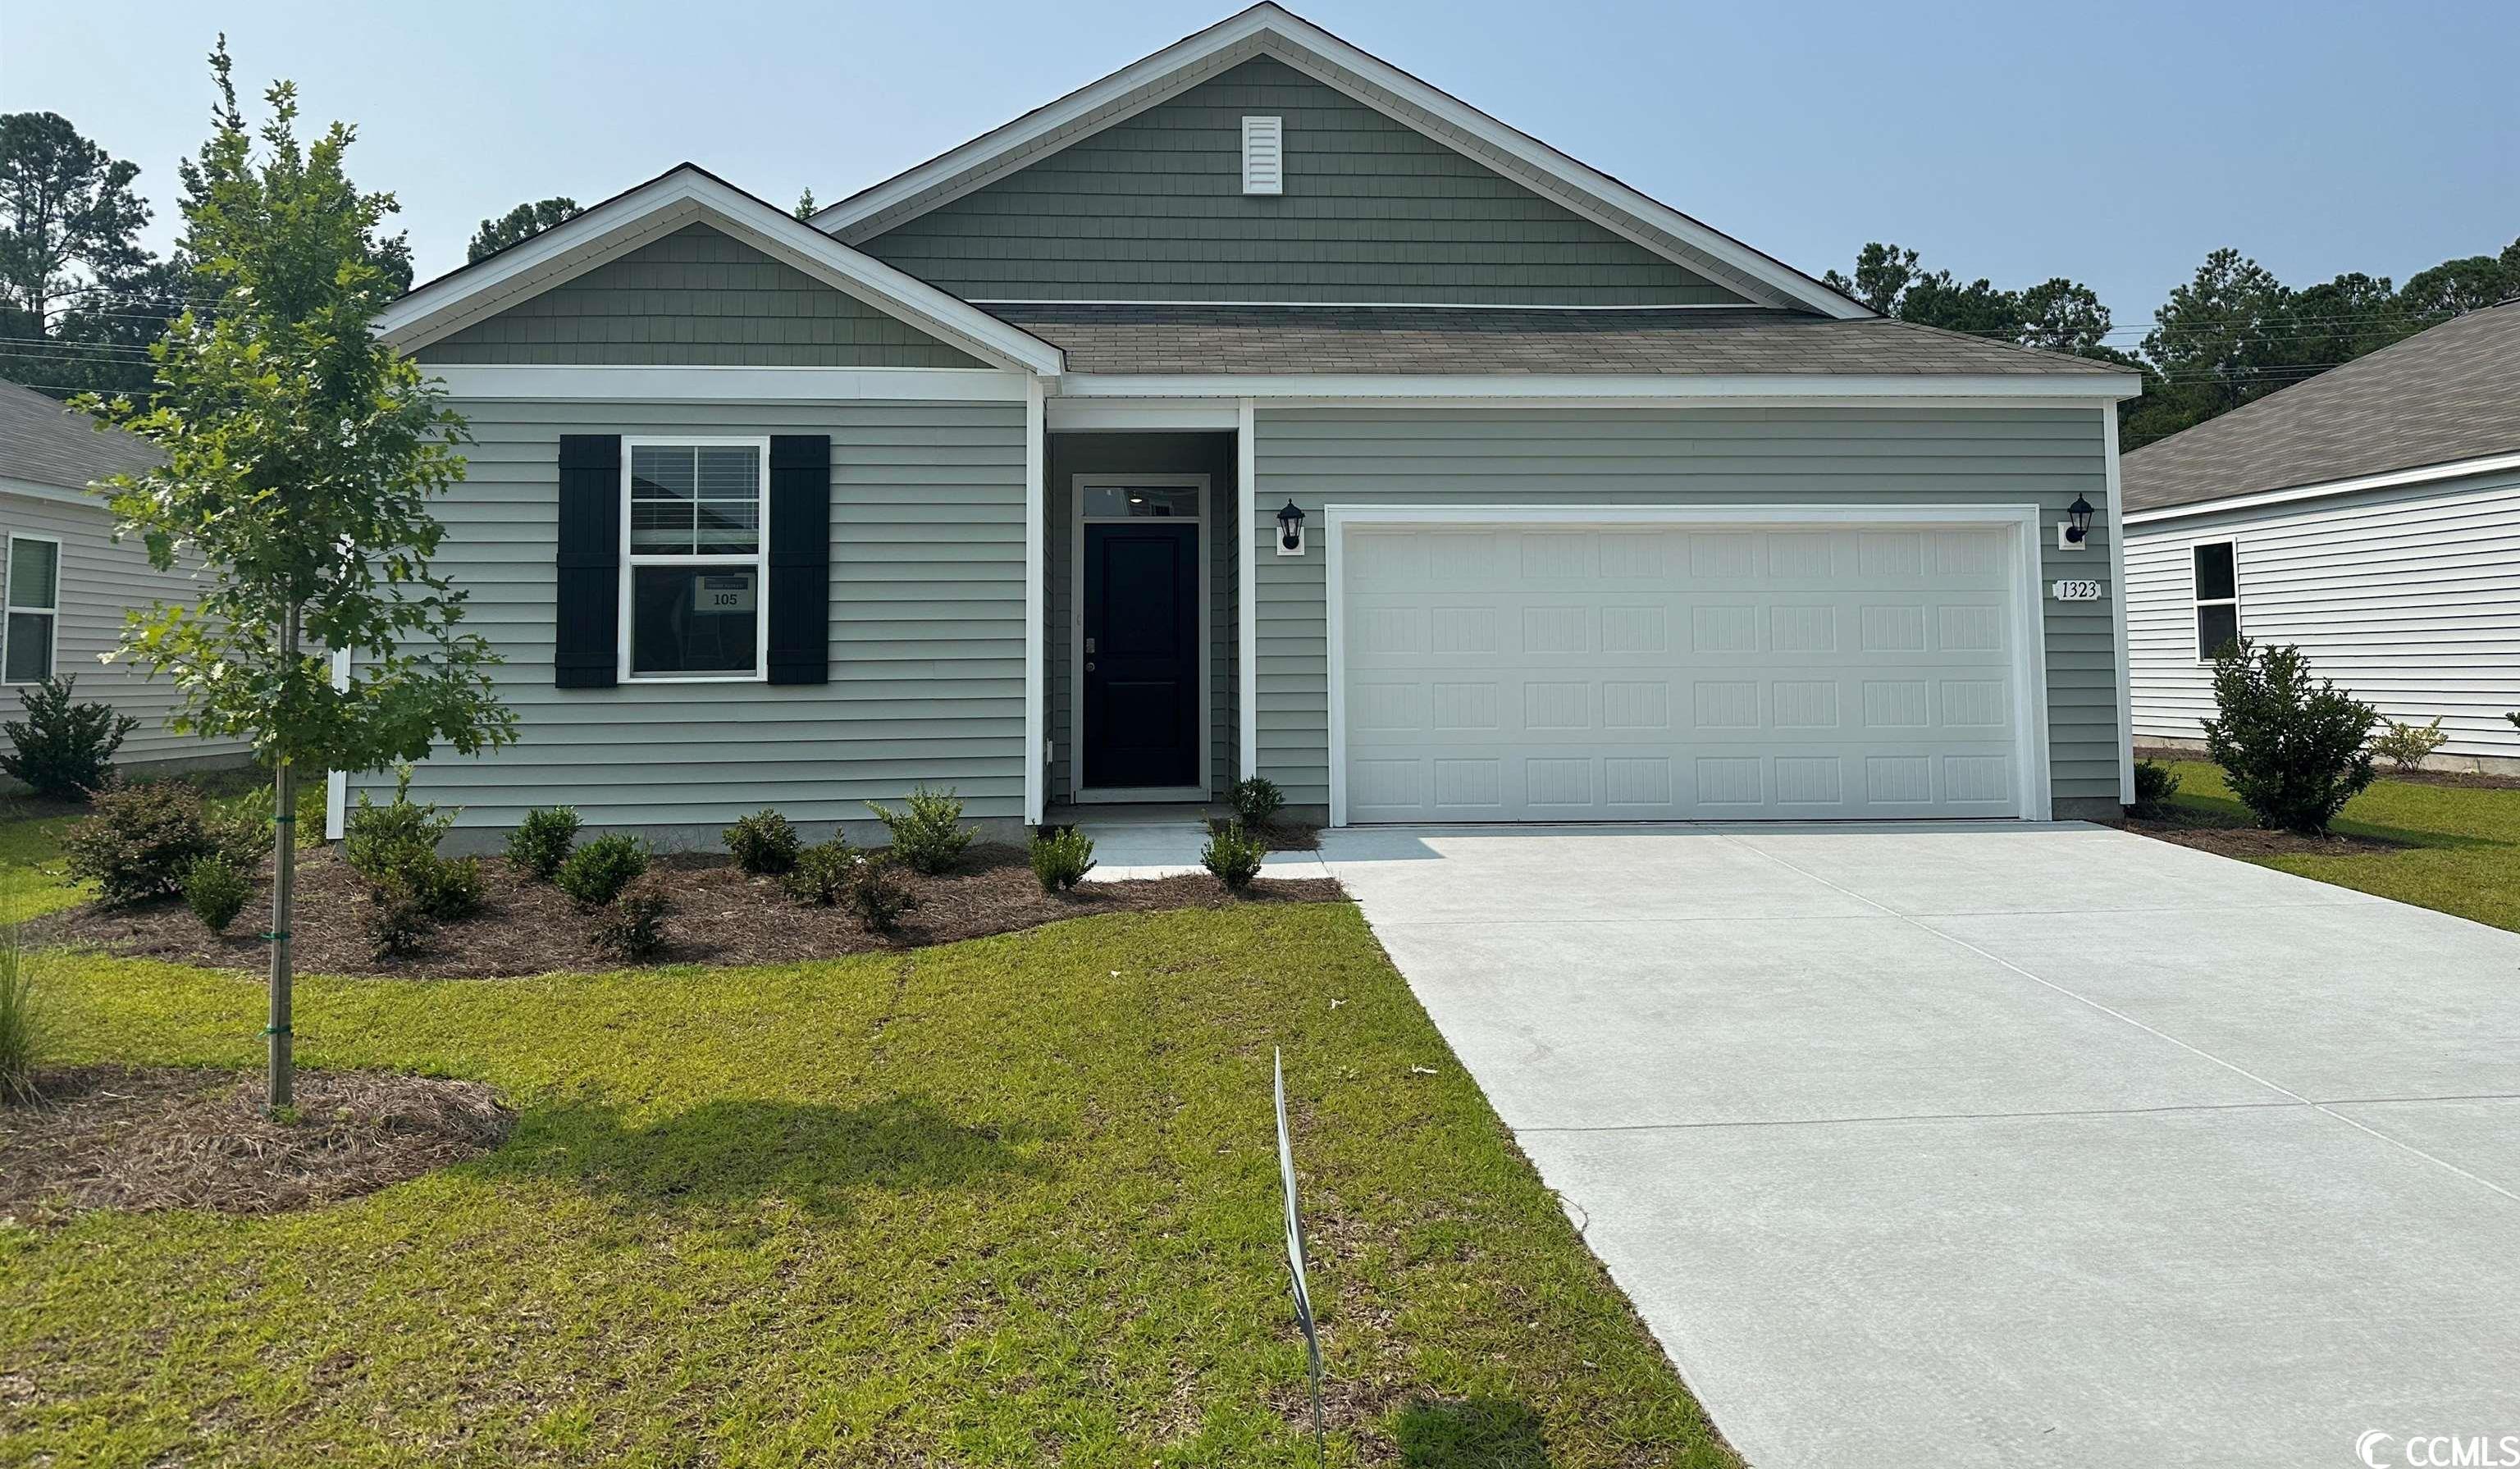 Photo one of 1522 Nokota Dr. Conway SC 29526 | MLS 2325438